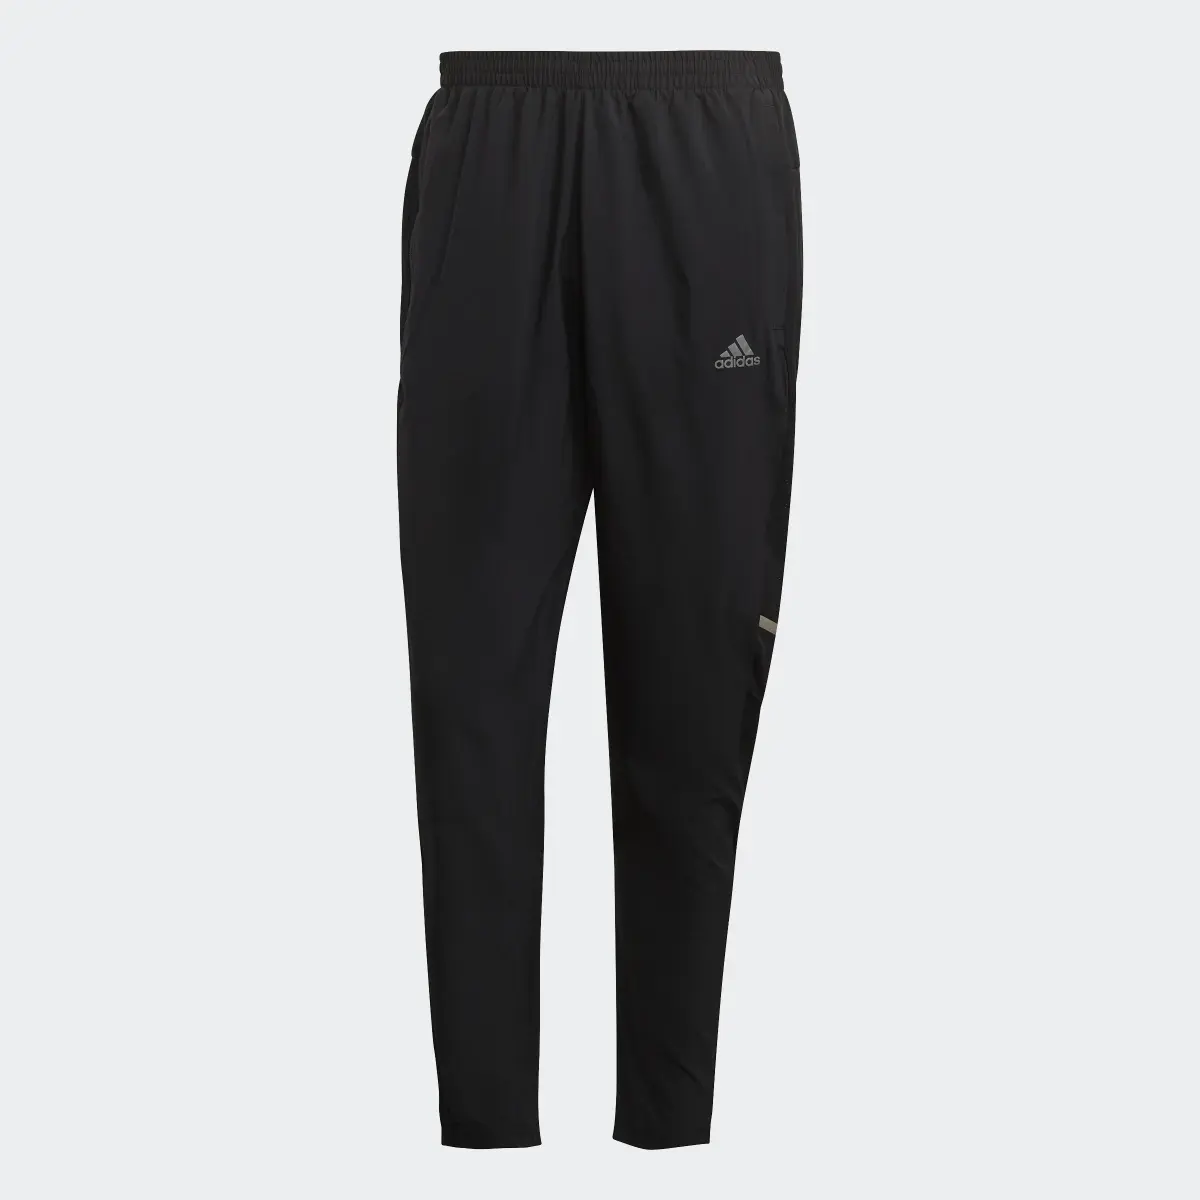 Adidas Own The Run Cooler Joggers. 1